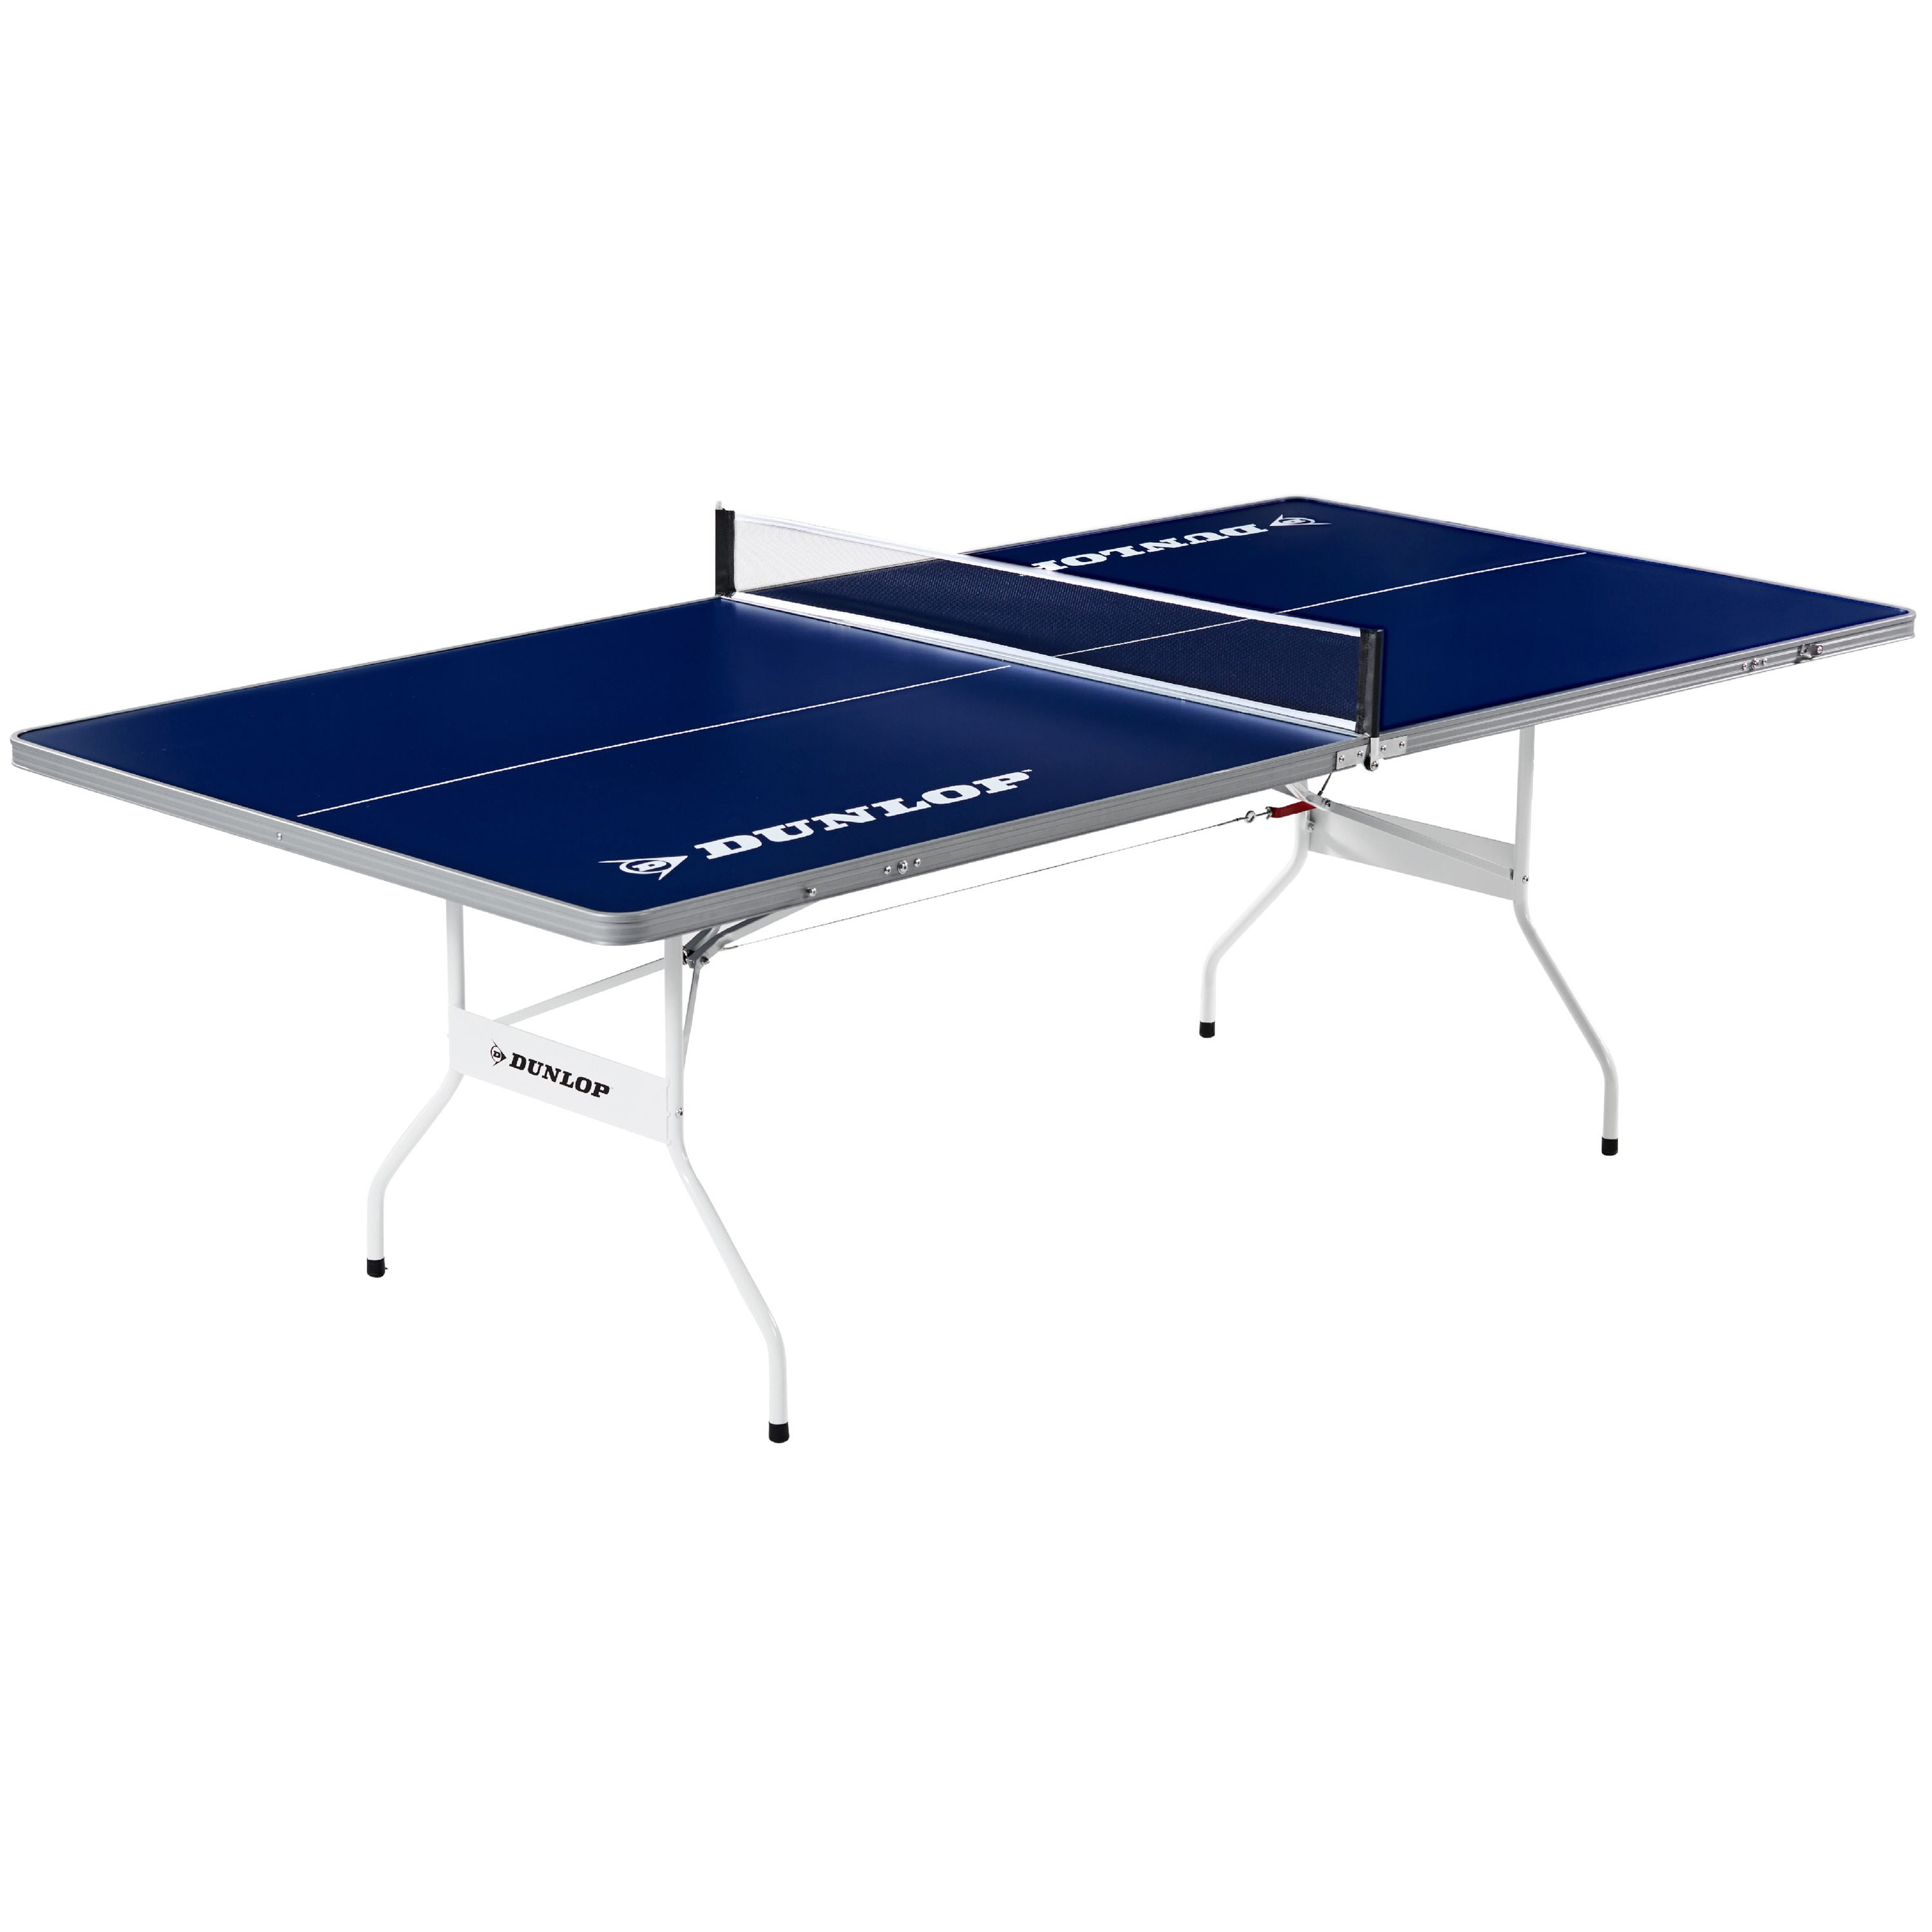 DUNLOP EZ-Fold Indoor-Outdoor Table Tennis Table, 100% Pre-assembled, Portable, Ideal Size for Storage, Mid-size, Navy Blue